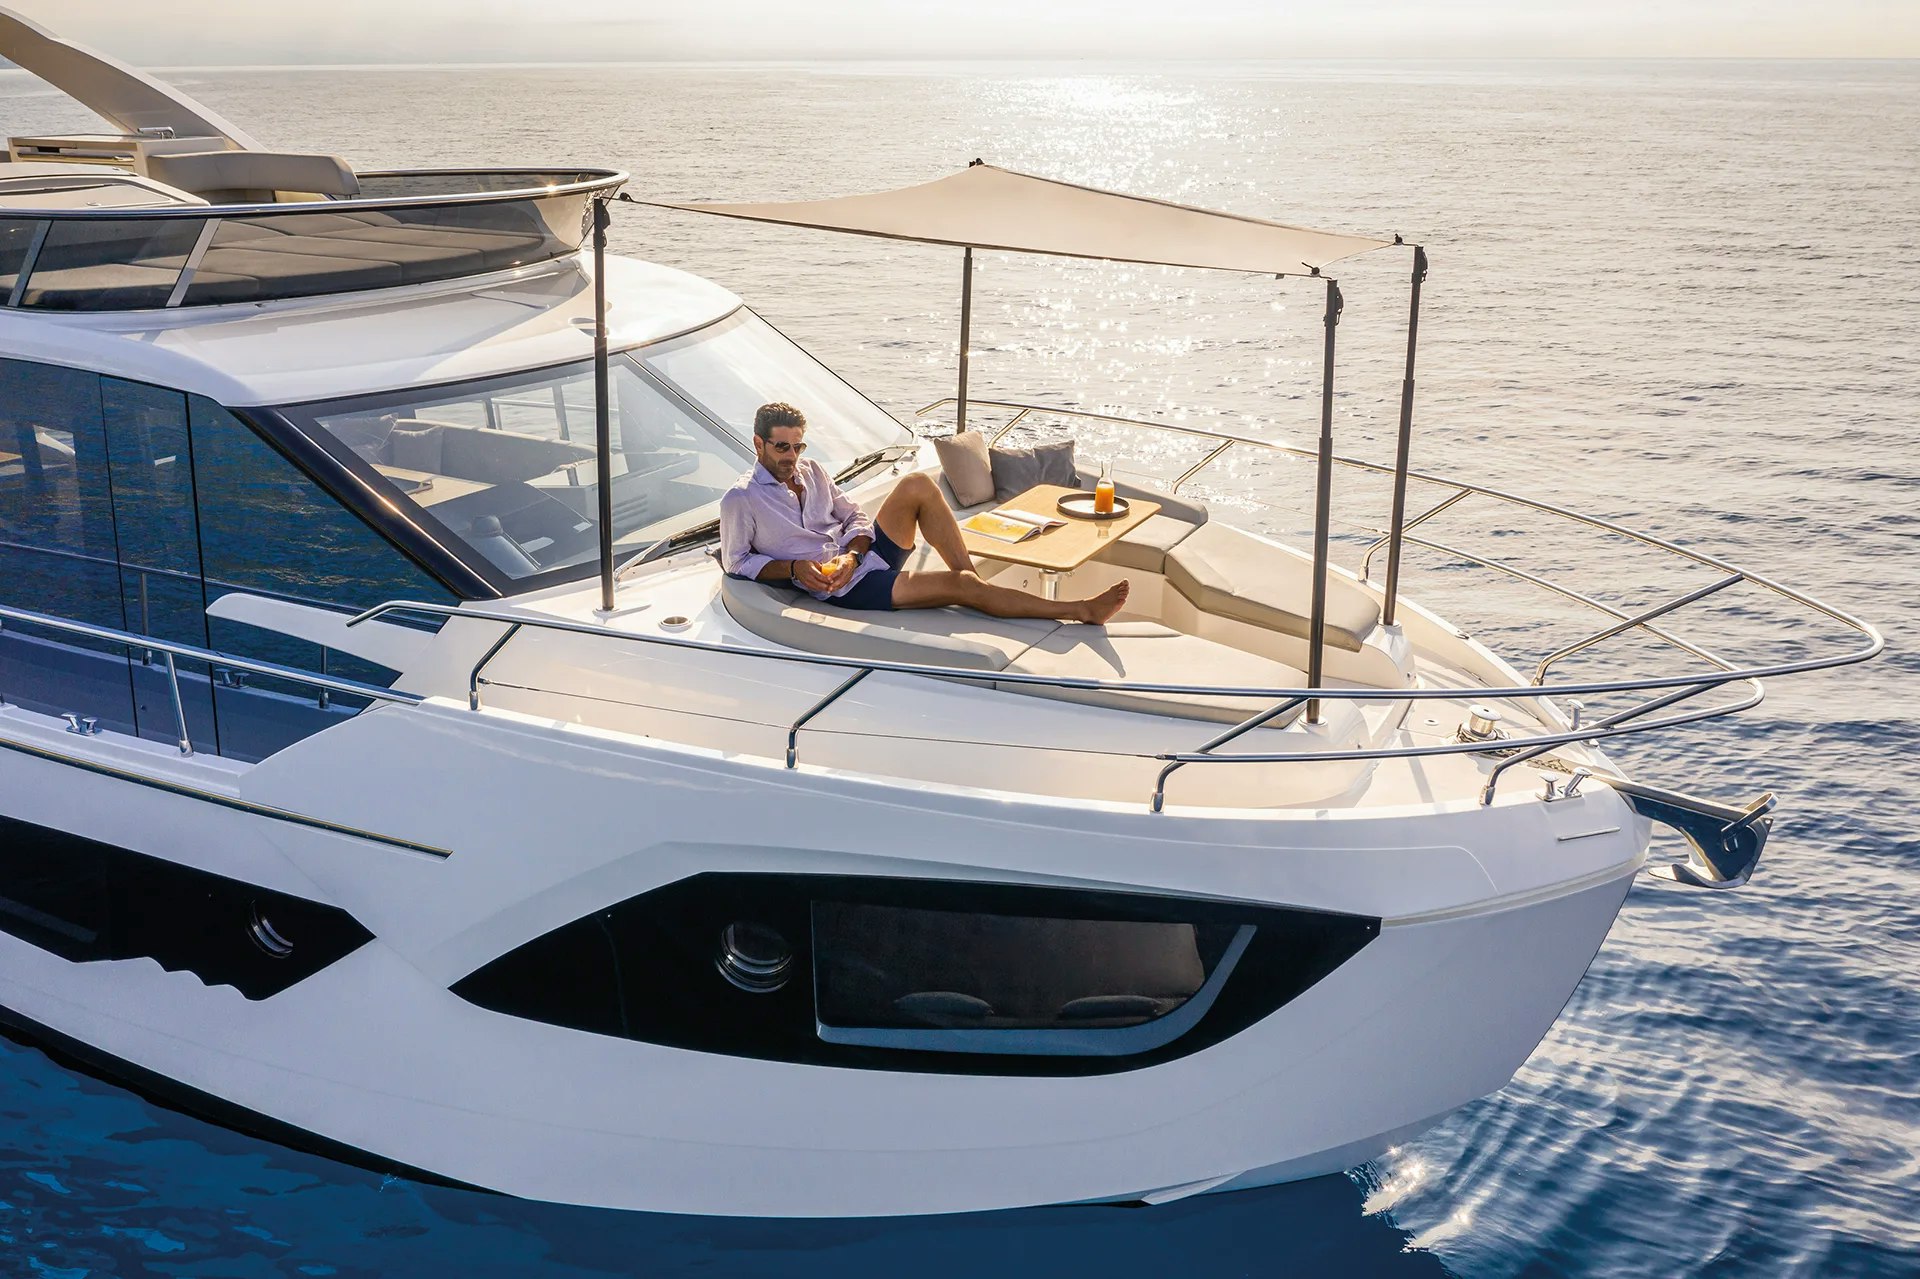 Man relaxing on yacht.